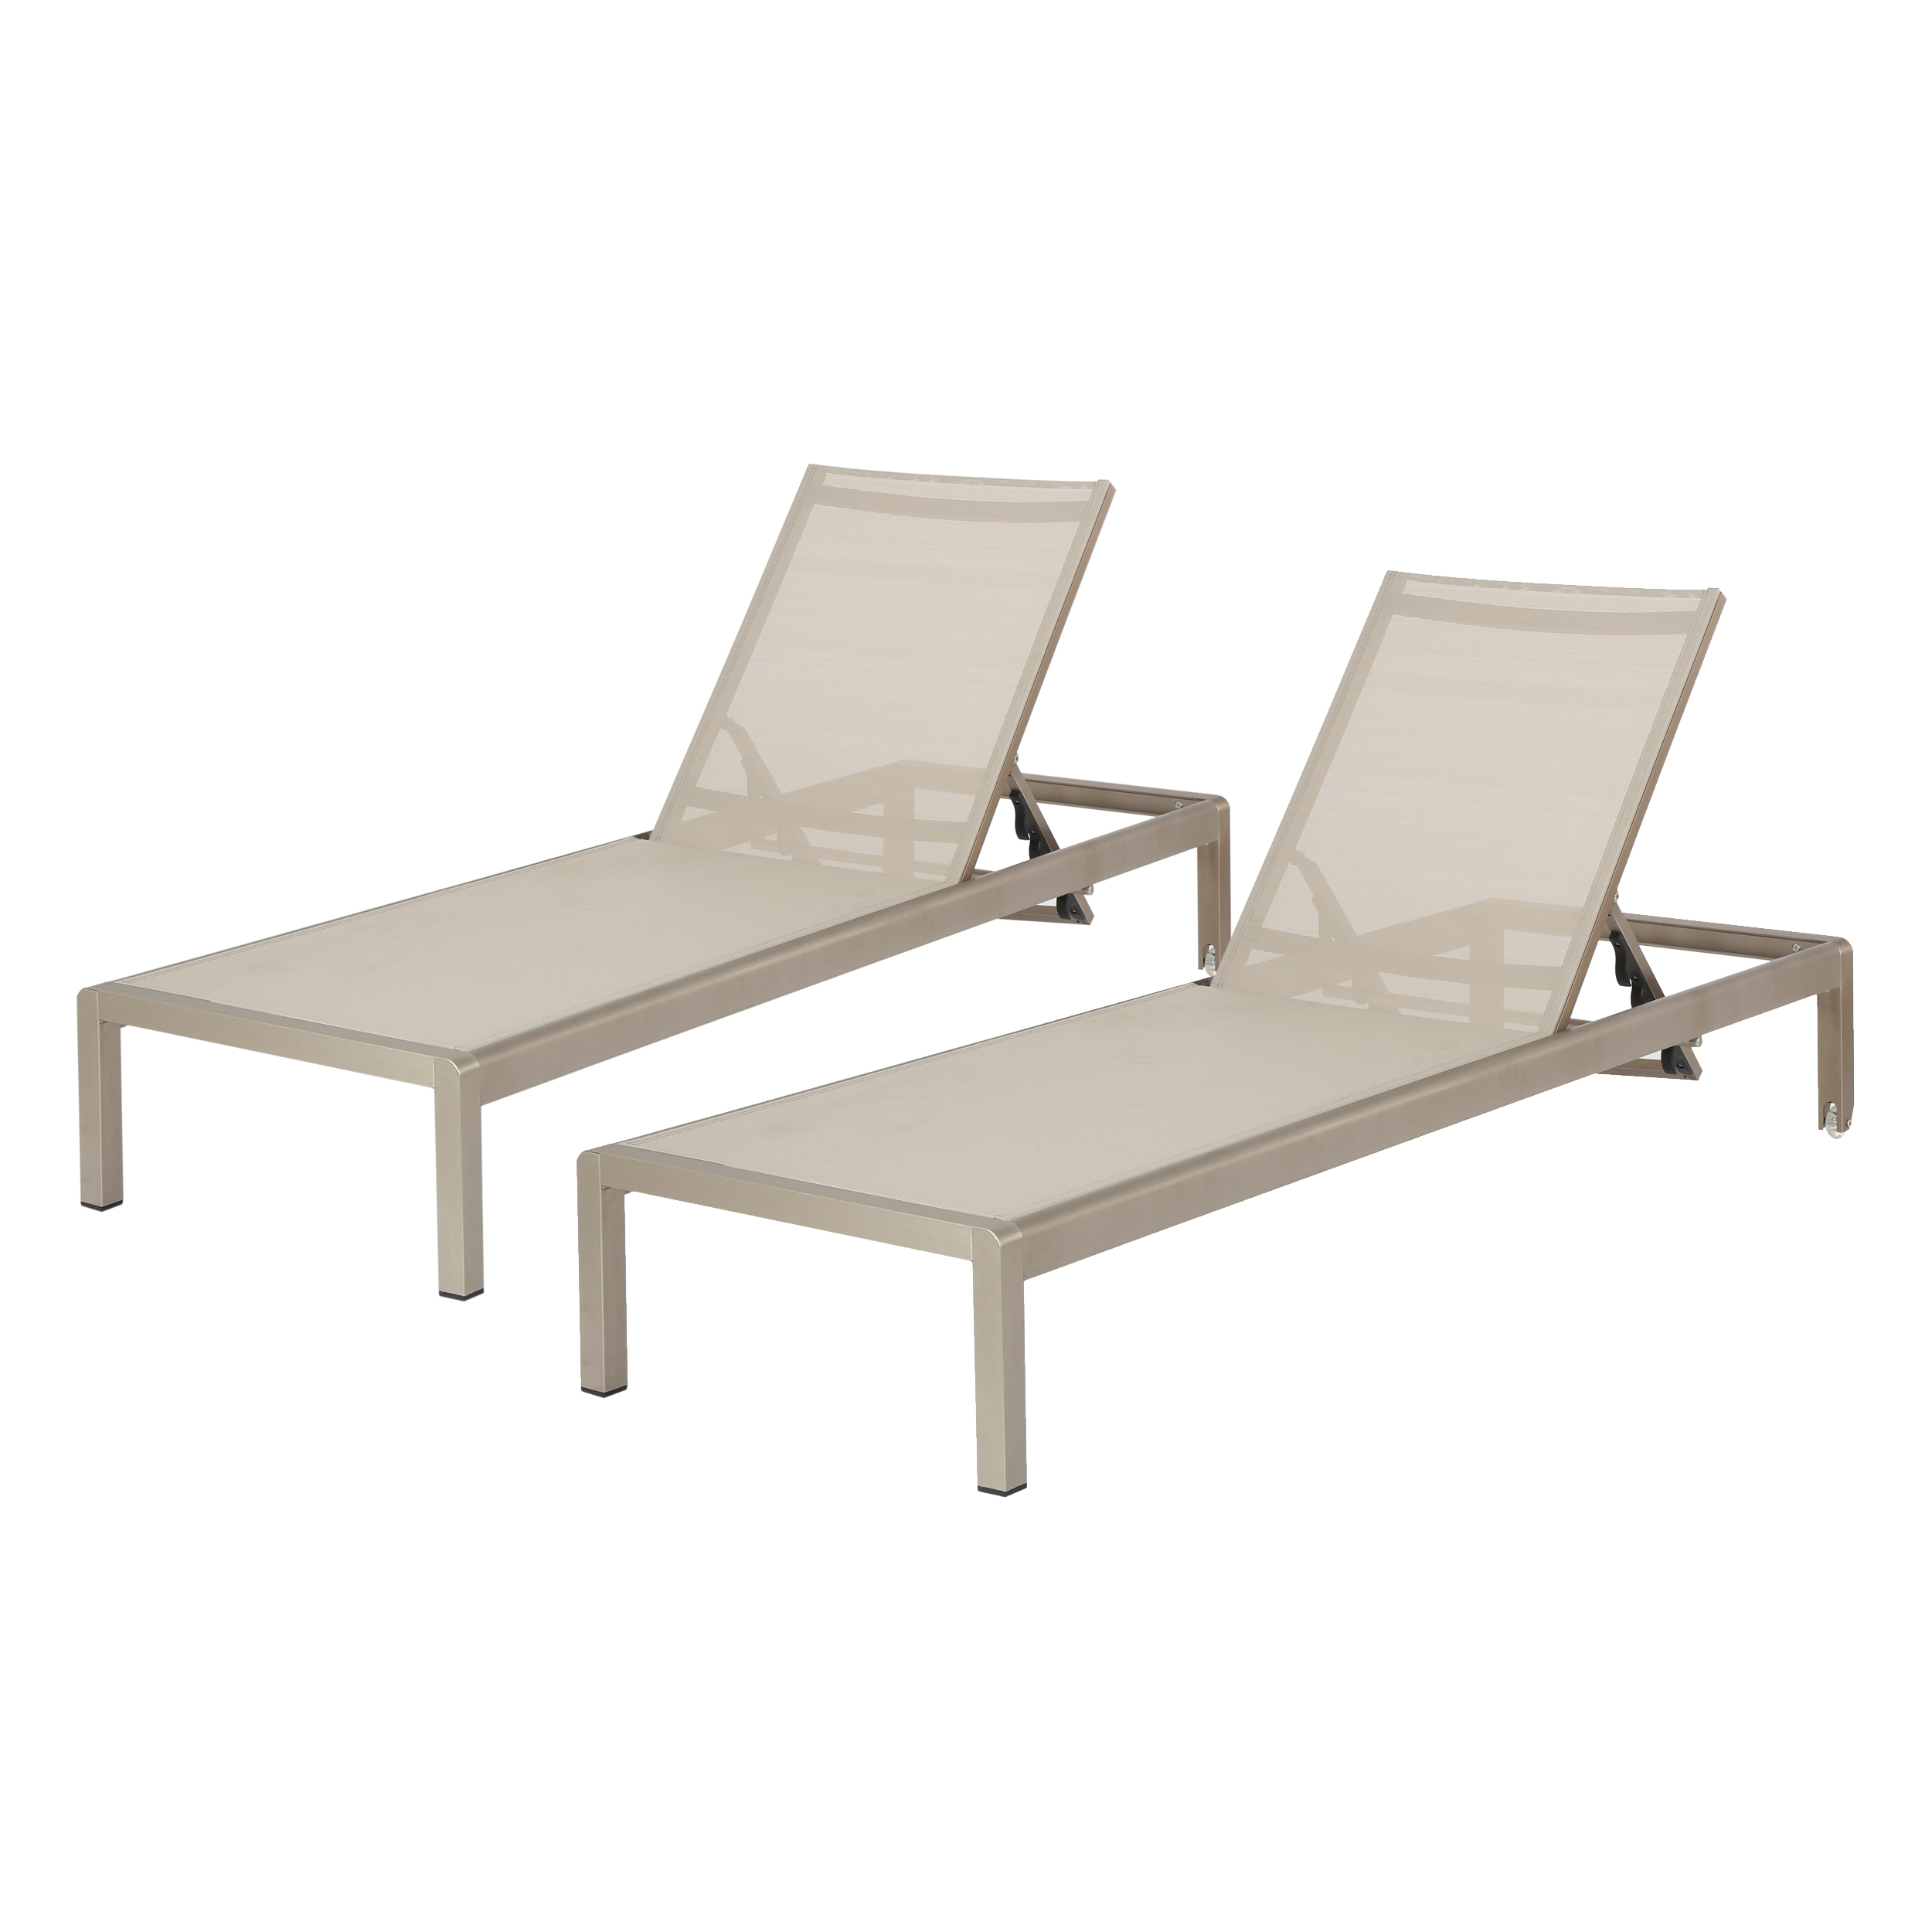 Chaise longue outdoor noble house gray outdoor mesh chaise longue (set of 2) EMPQVLI